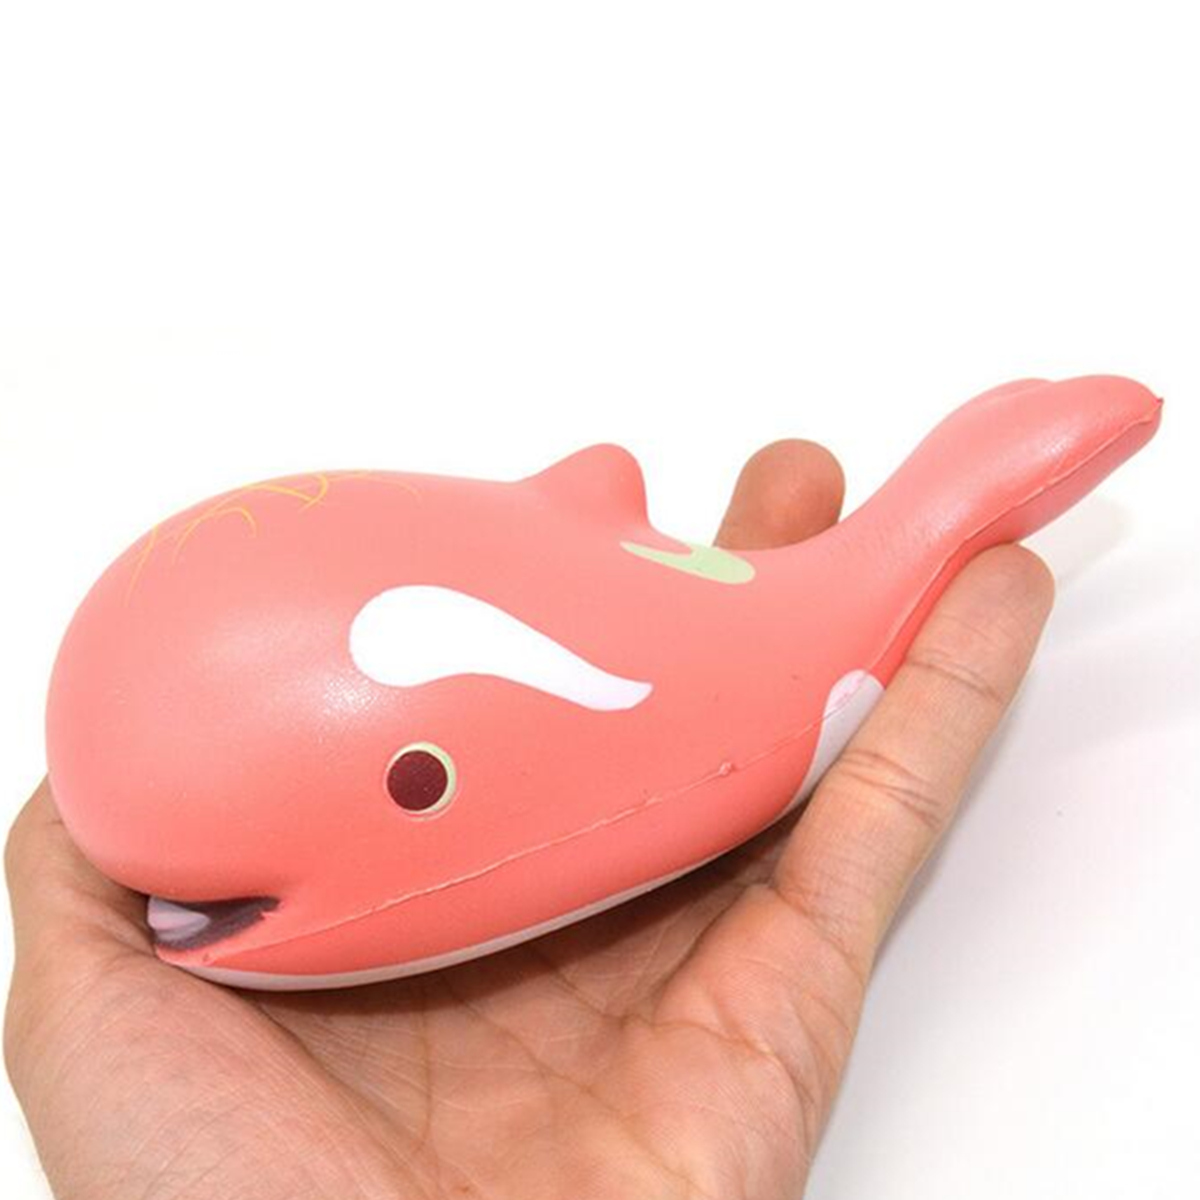 15cm-Whale-Squishy-Slow-Rising-Pressure-Release-Soft-Toy-With-Keychains-for-Iphone-Samsung-Xiaomi-1145805-2